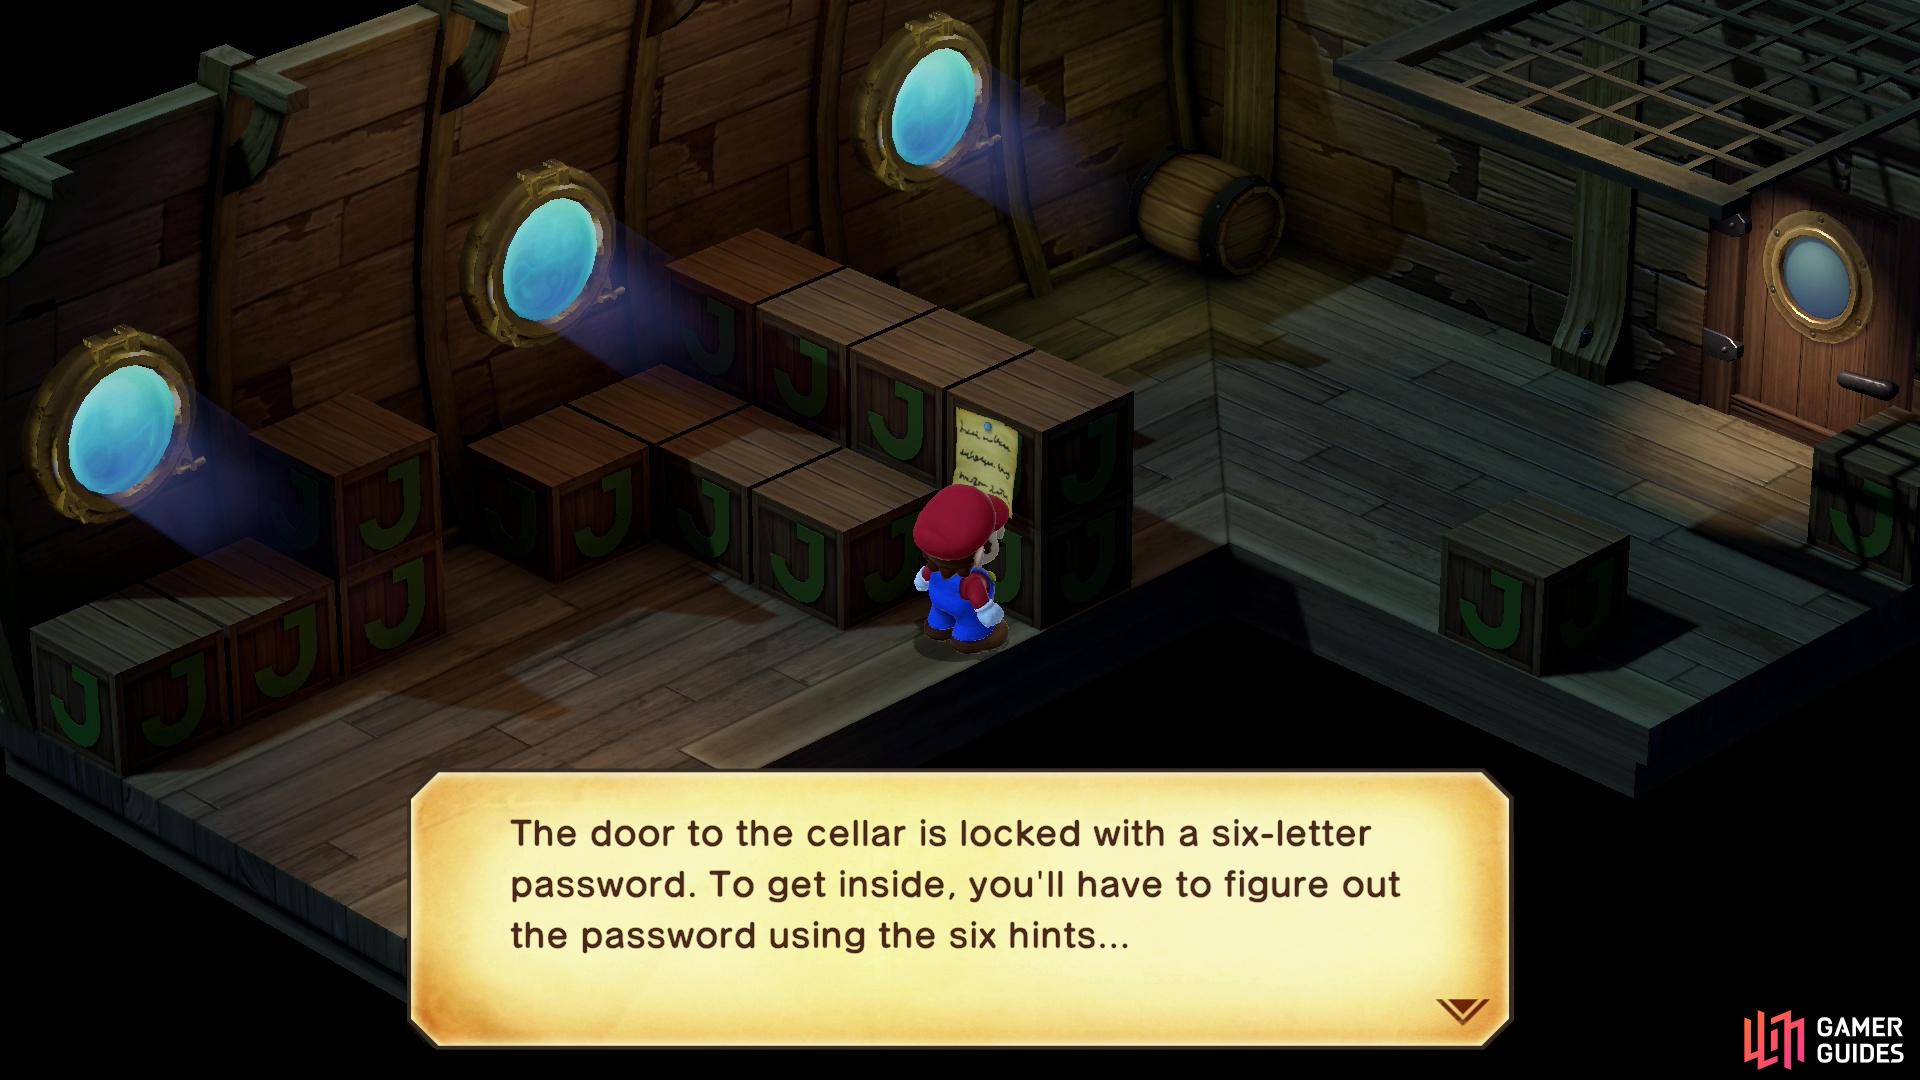 Read a note near the start of the dungeon to find out what you'll be doing in a bit - finding clues to figure out a password.